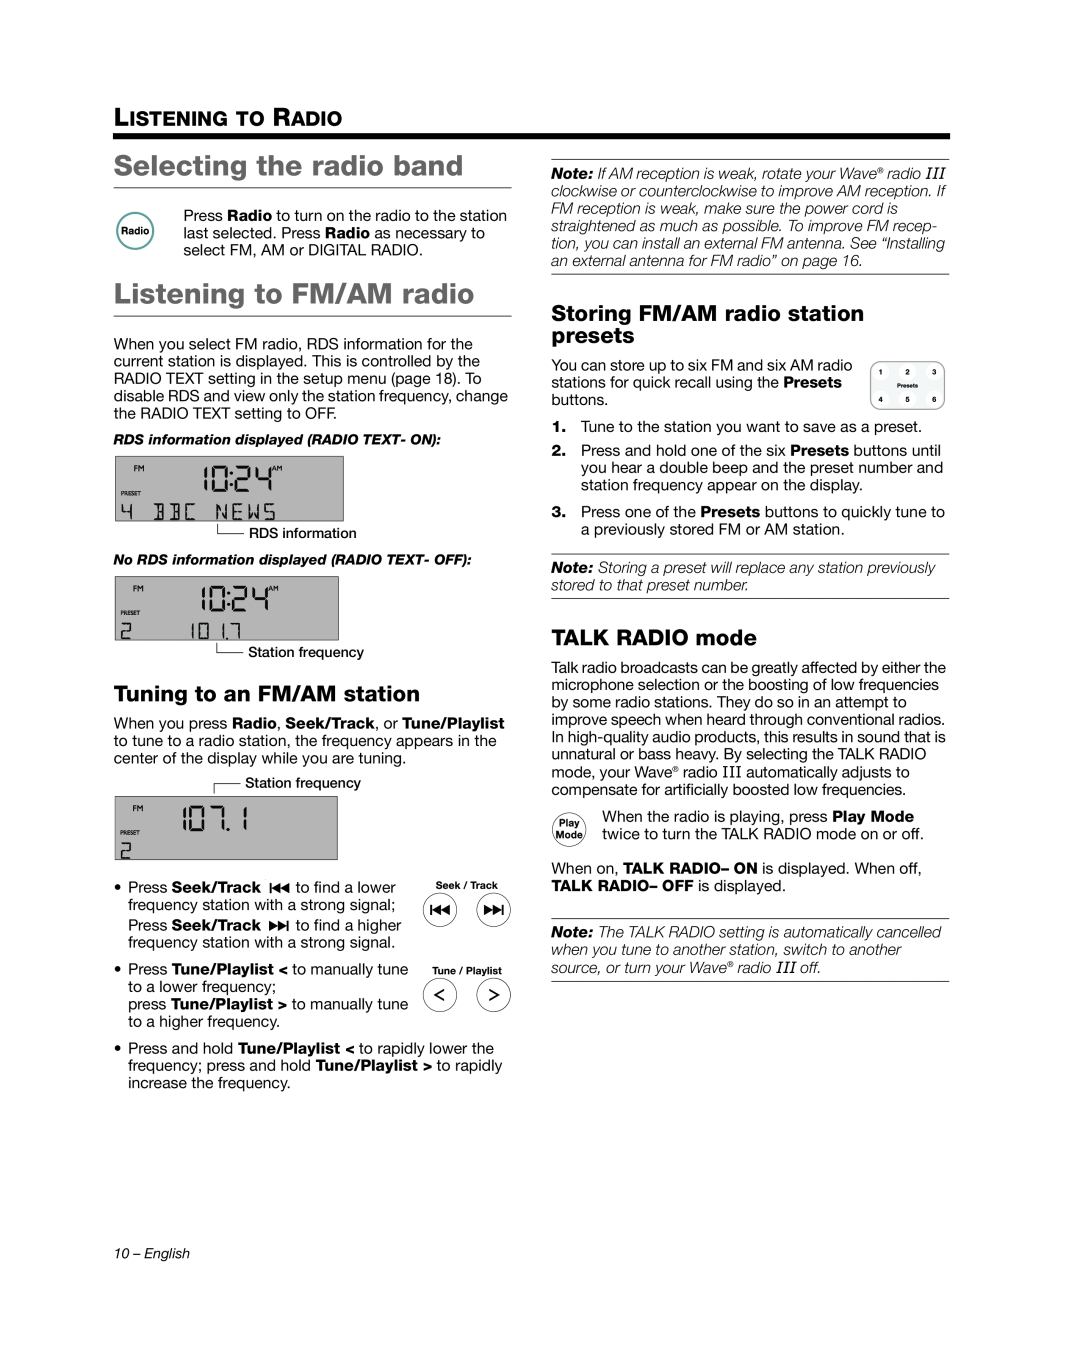 Bose III manual Selecting the radio band, Listening to FM/AM radio, Tuning to an FM/AM station, TALK RADIO mode 